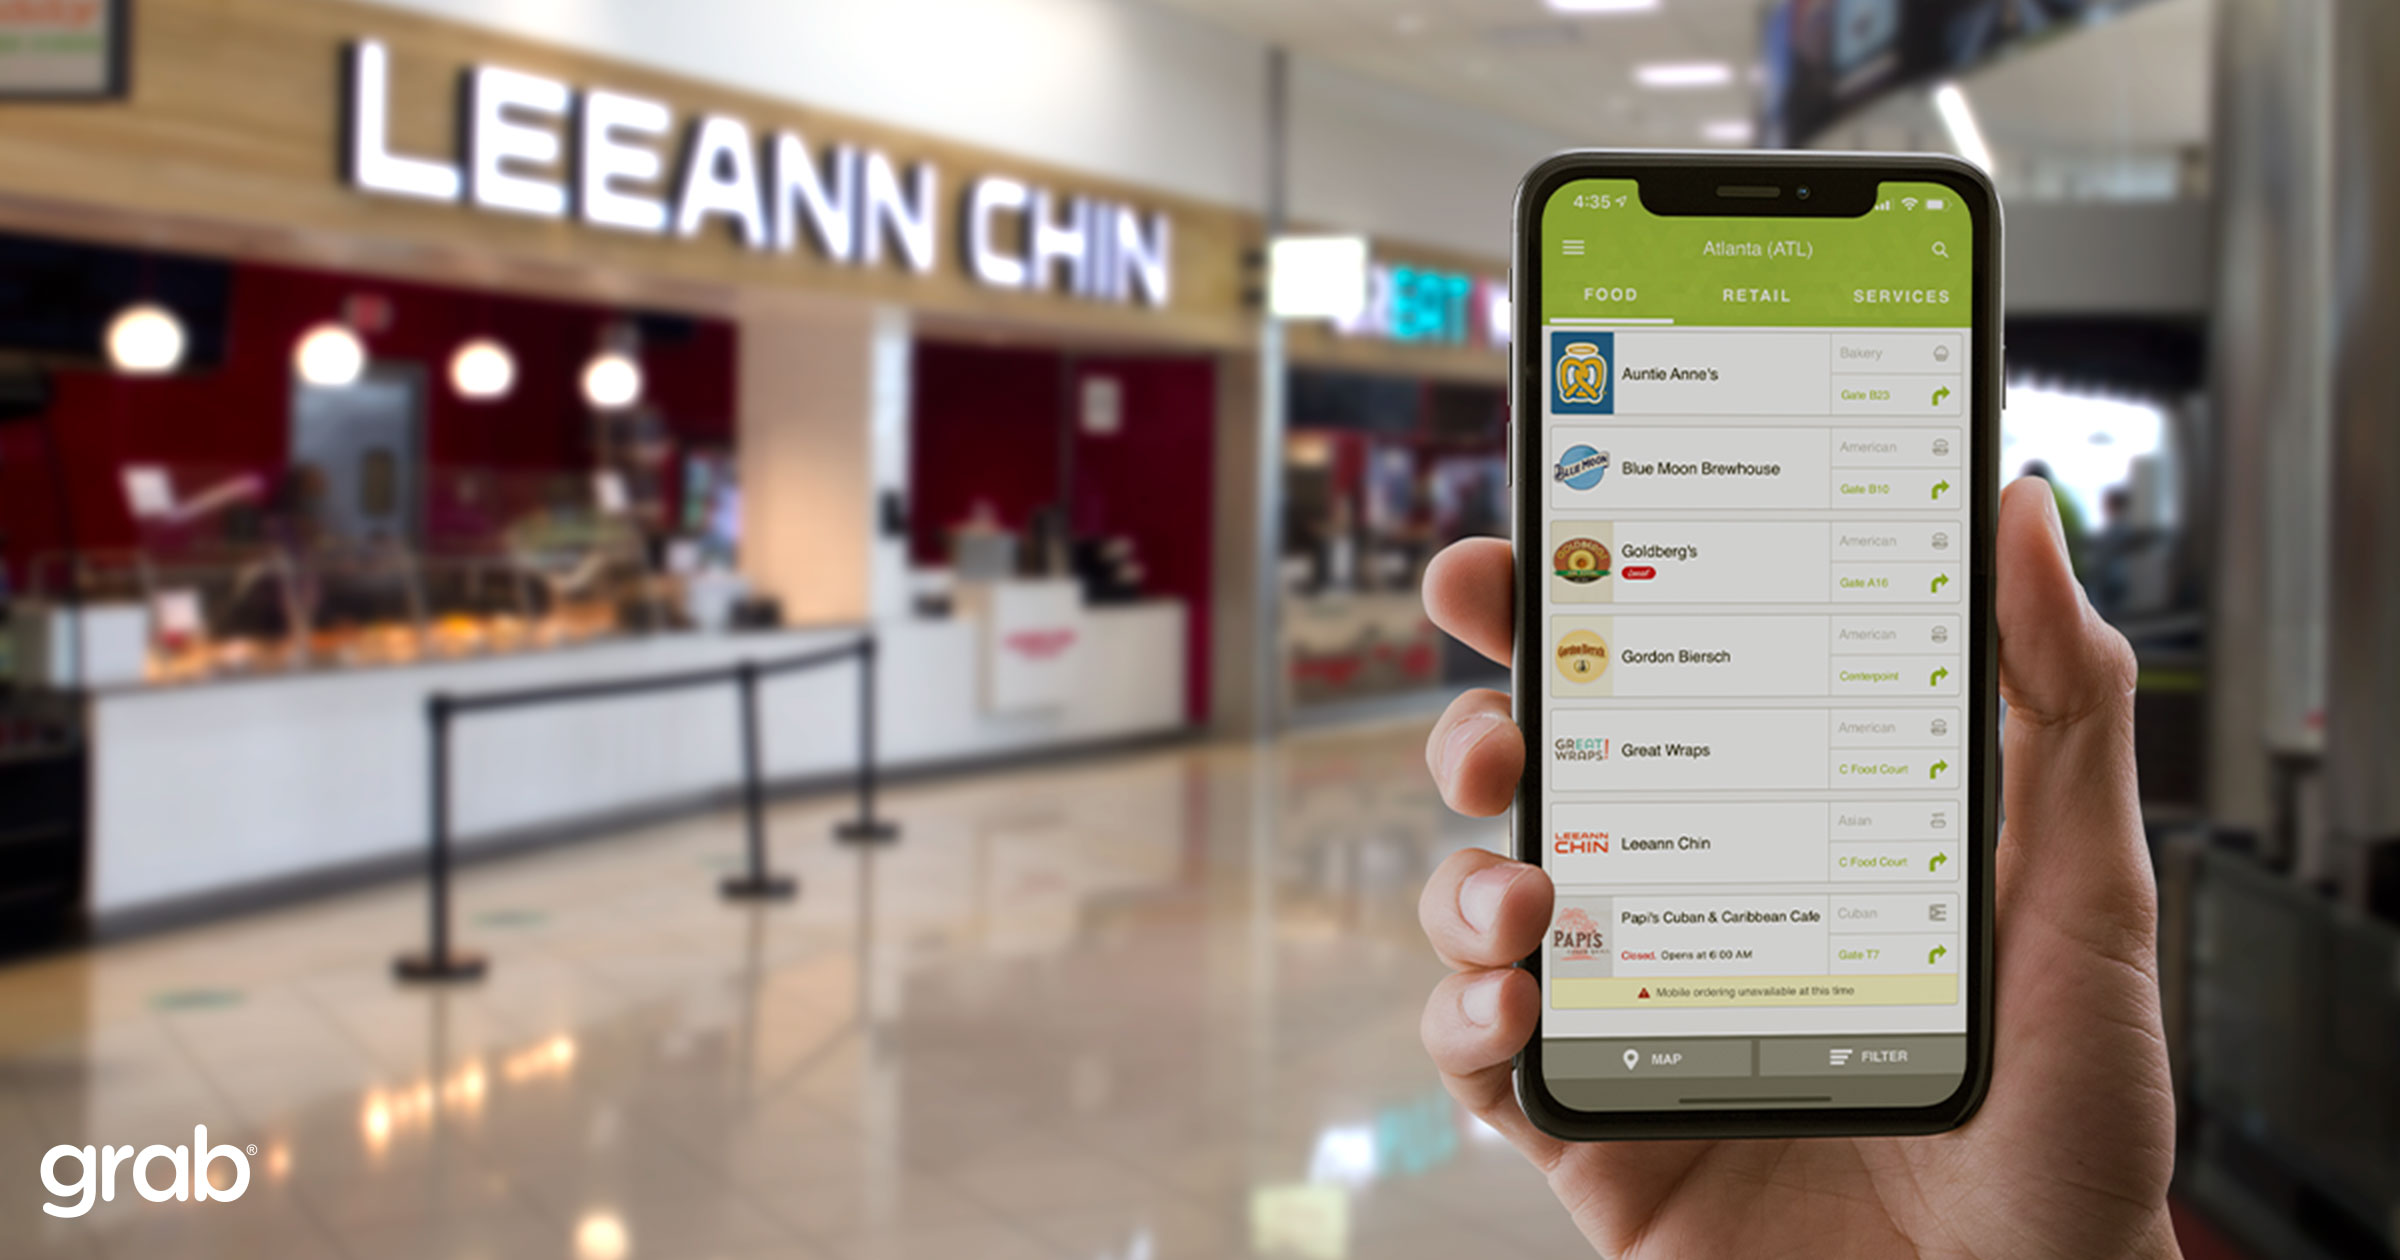 A product of Servy, Grab is the largest e-commerce platform in airports worldwide. It can link all restaurants and retailers together with customers through a variety of different digital channels.